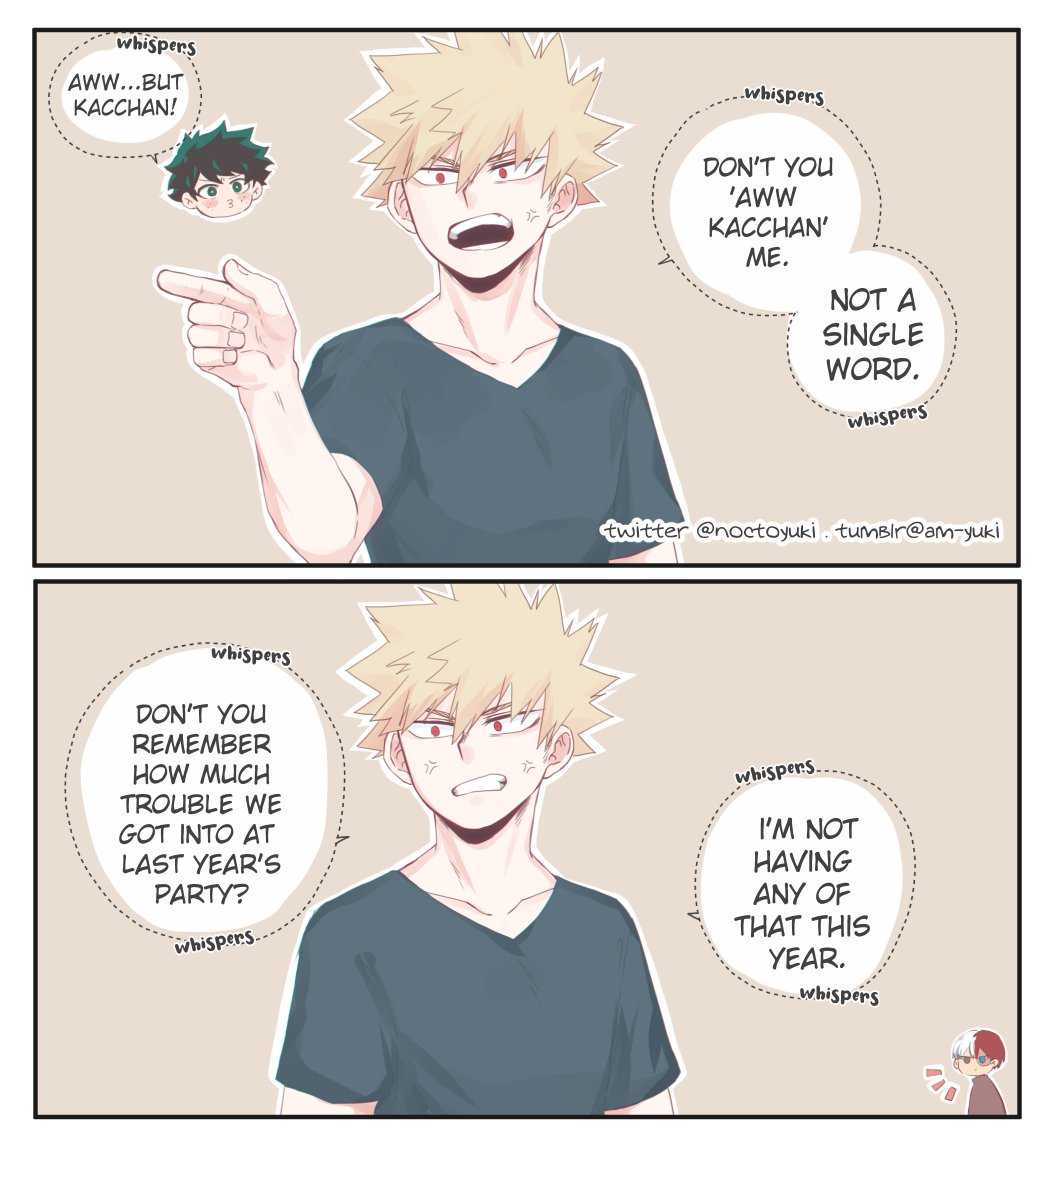 5 days more before Kacchan's Birthday. 

They may or may not have gone too wild while celebrating Kacchan's birthday back in school days. 